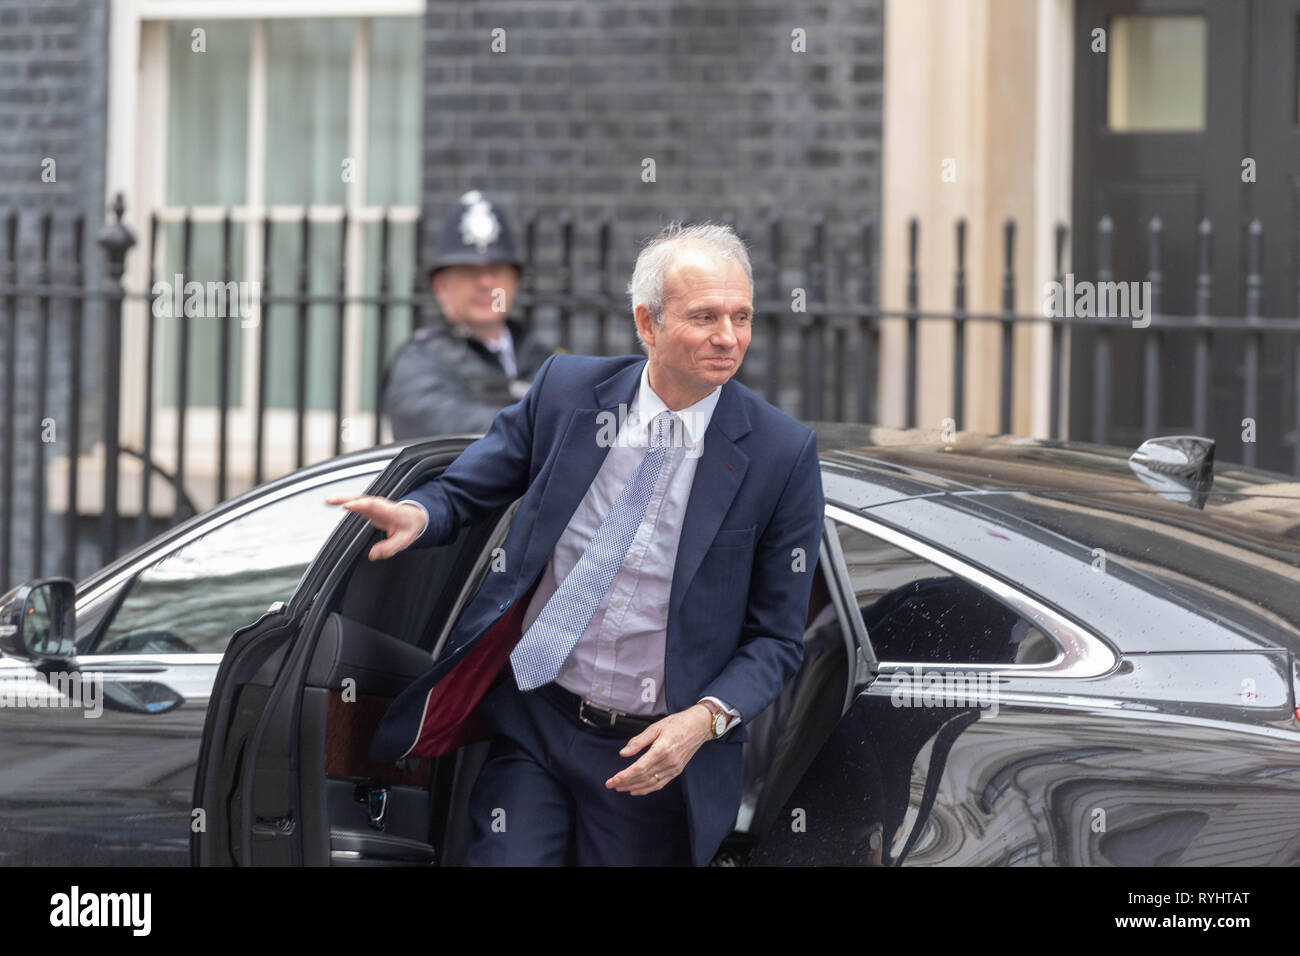 London, UK. 14th March 2019, David Lidinton MP PC, Cabinet minister arrives at a Cabinet meeting at 10 Downing Street, London, UK. Credit: Ian Davidson/Alamy Live News Stock Photo